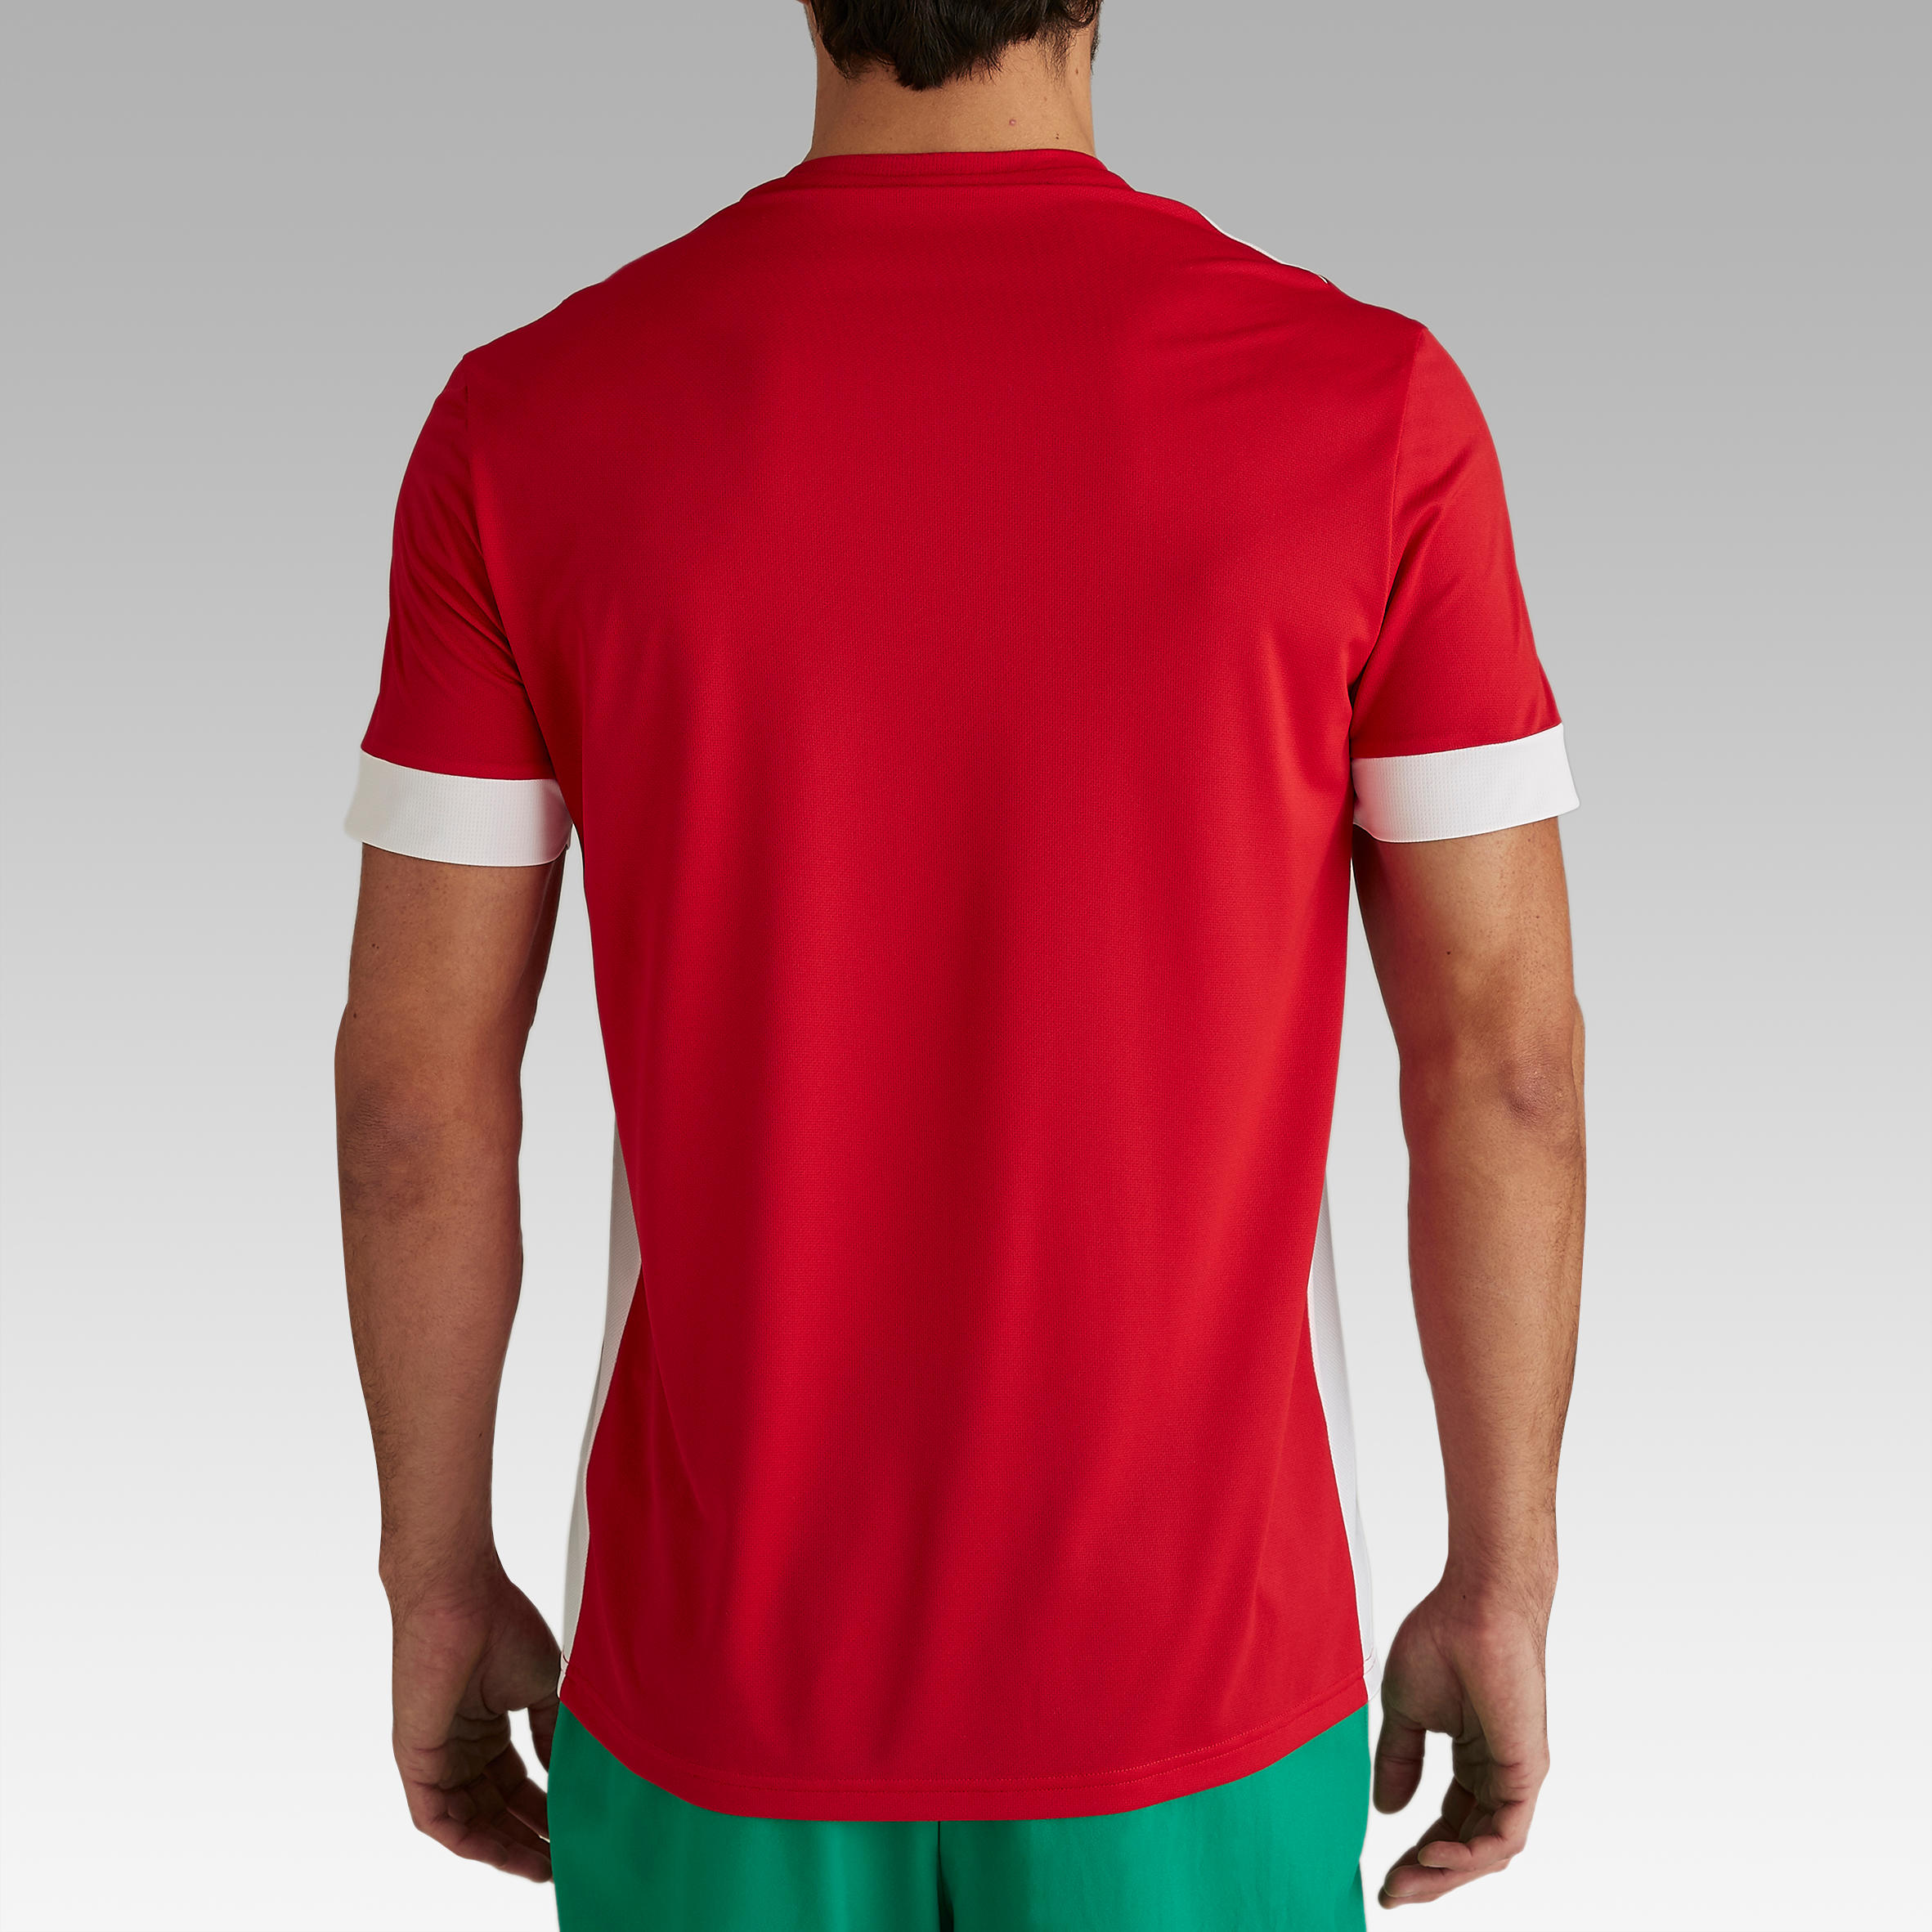 F500 Adult Football Jersey - Red 4/10